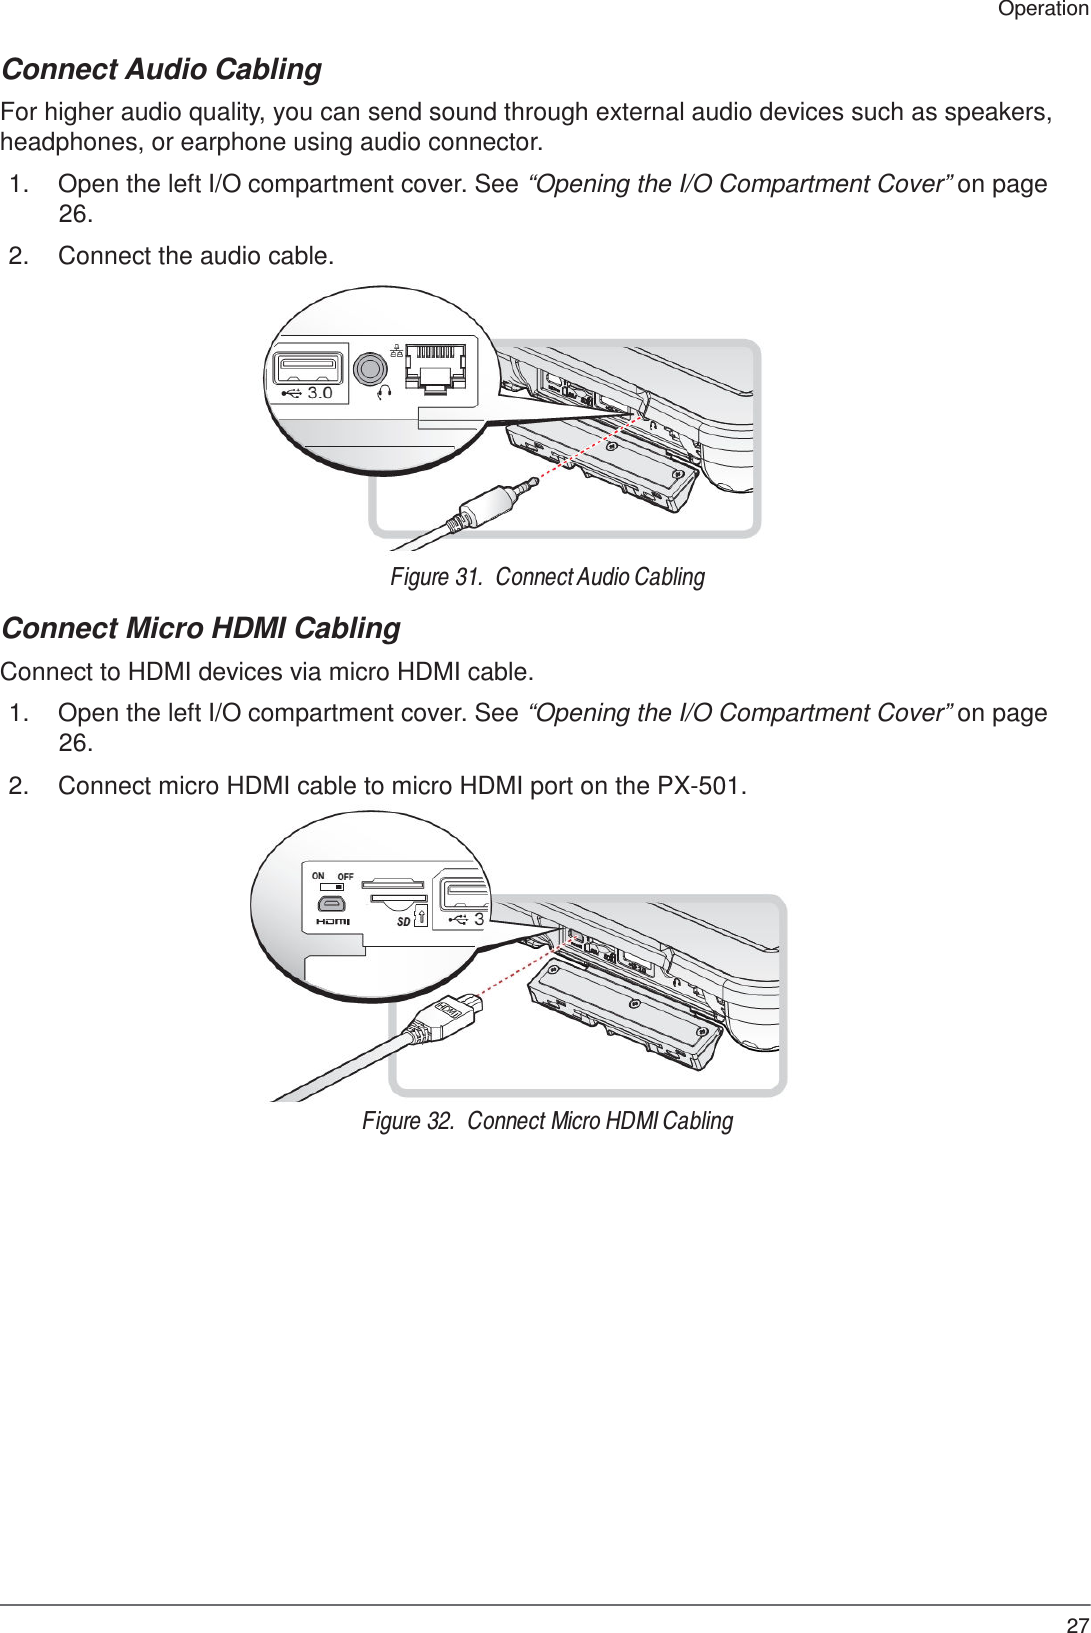 27 Operation    Connect Audio Cabling  For higher audio quality, you can send sound through external audio devices such as speakers, headphones, or earphone using audio connector.  1.  Open the left I/O compartment cover. See “Opening the I/O Compartment Cover” on page 26.  2.  Connect the audio cable.               Figure 31.  Connect Audio Cabling  Connect Micro HDMI Cabling  Connect to HDMI devices via micro HDMI cable.  1.  Open the left I/O compartment cover. See “Opening the I/O Compartment Cover” on page 26.  2.  Connect micro HDMI cable to micro HDMI port on the PX-501.                 Figure 32.  Connect Micro HDMI Cabling 